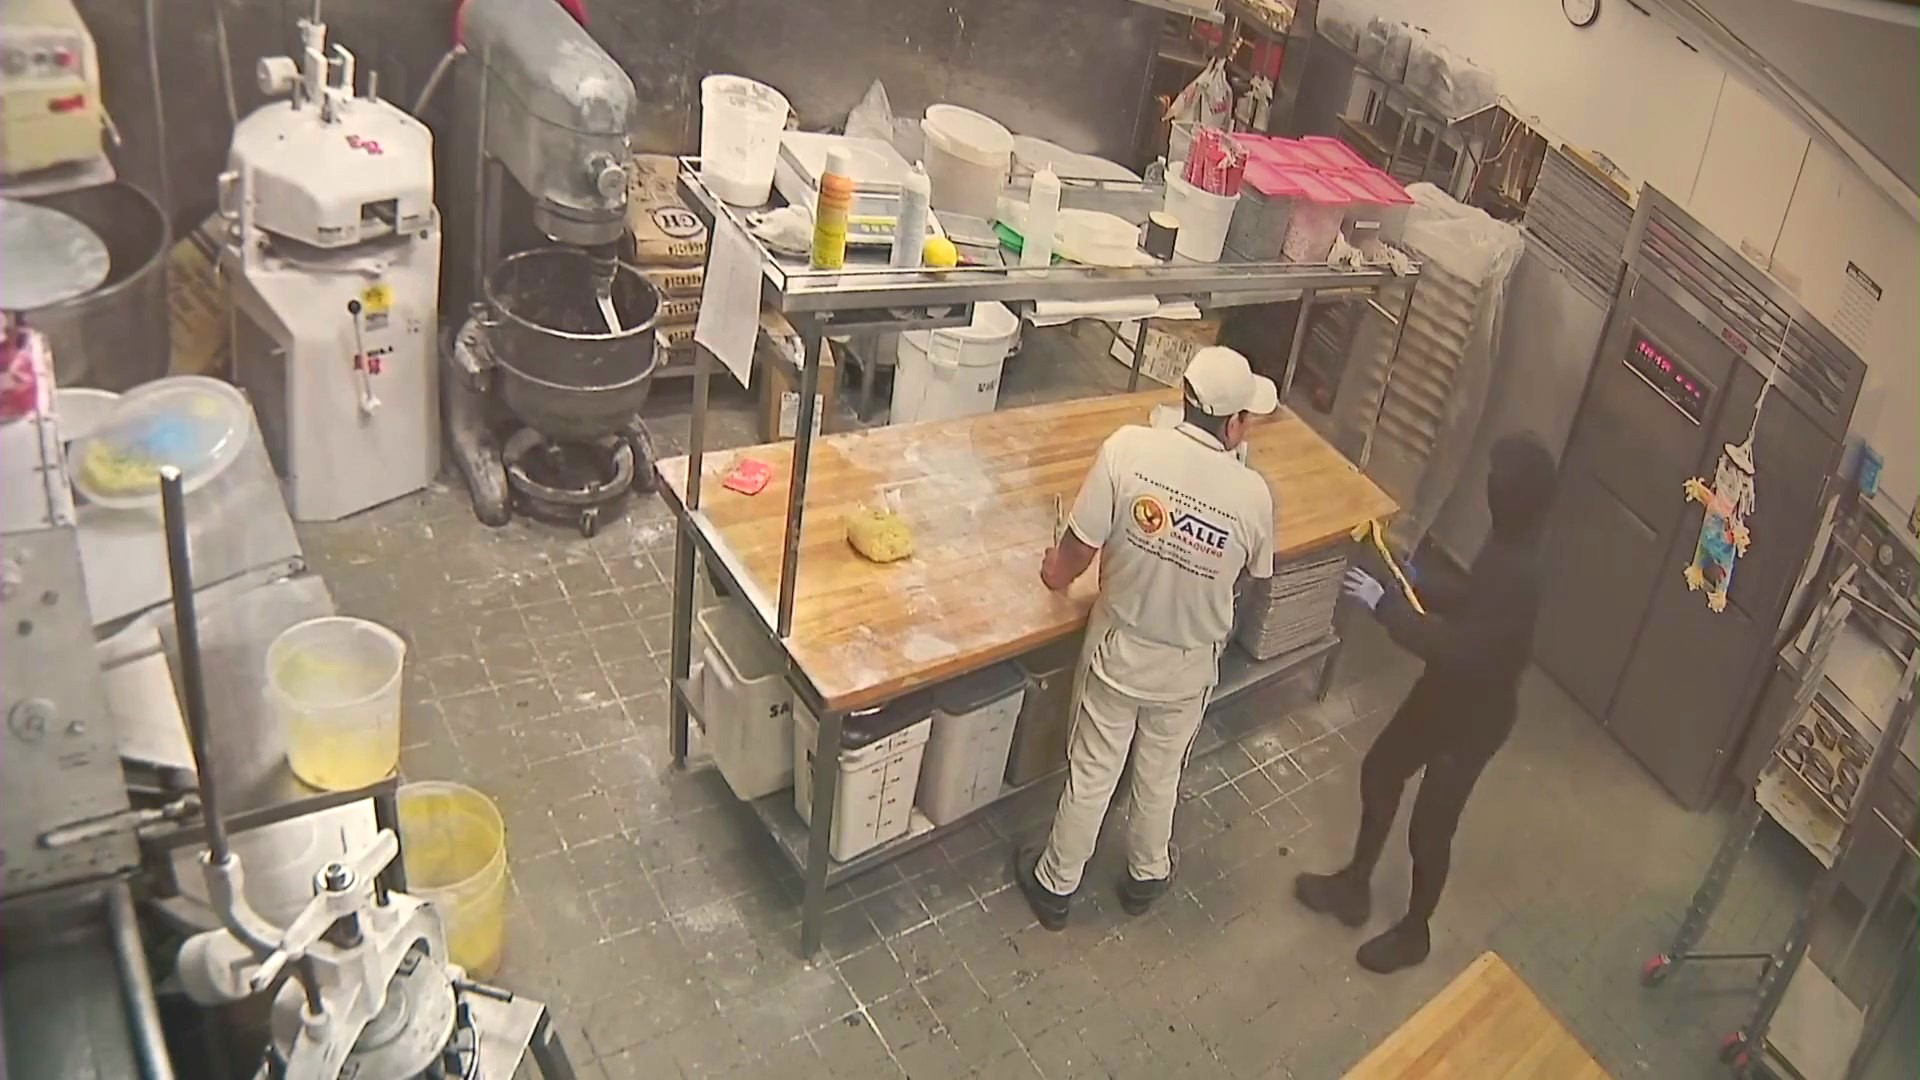 Video captures the terrifying moment a group of masked suspects ransacked a Pico-Union bakery as workers were still inside on Jan. 15, 2024. (El Valle Oaxaqueño)